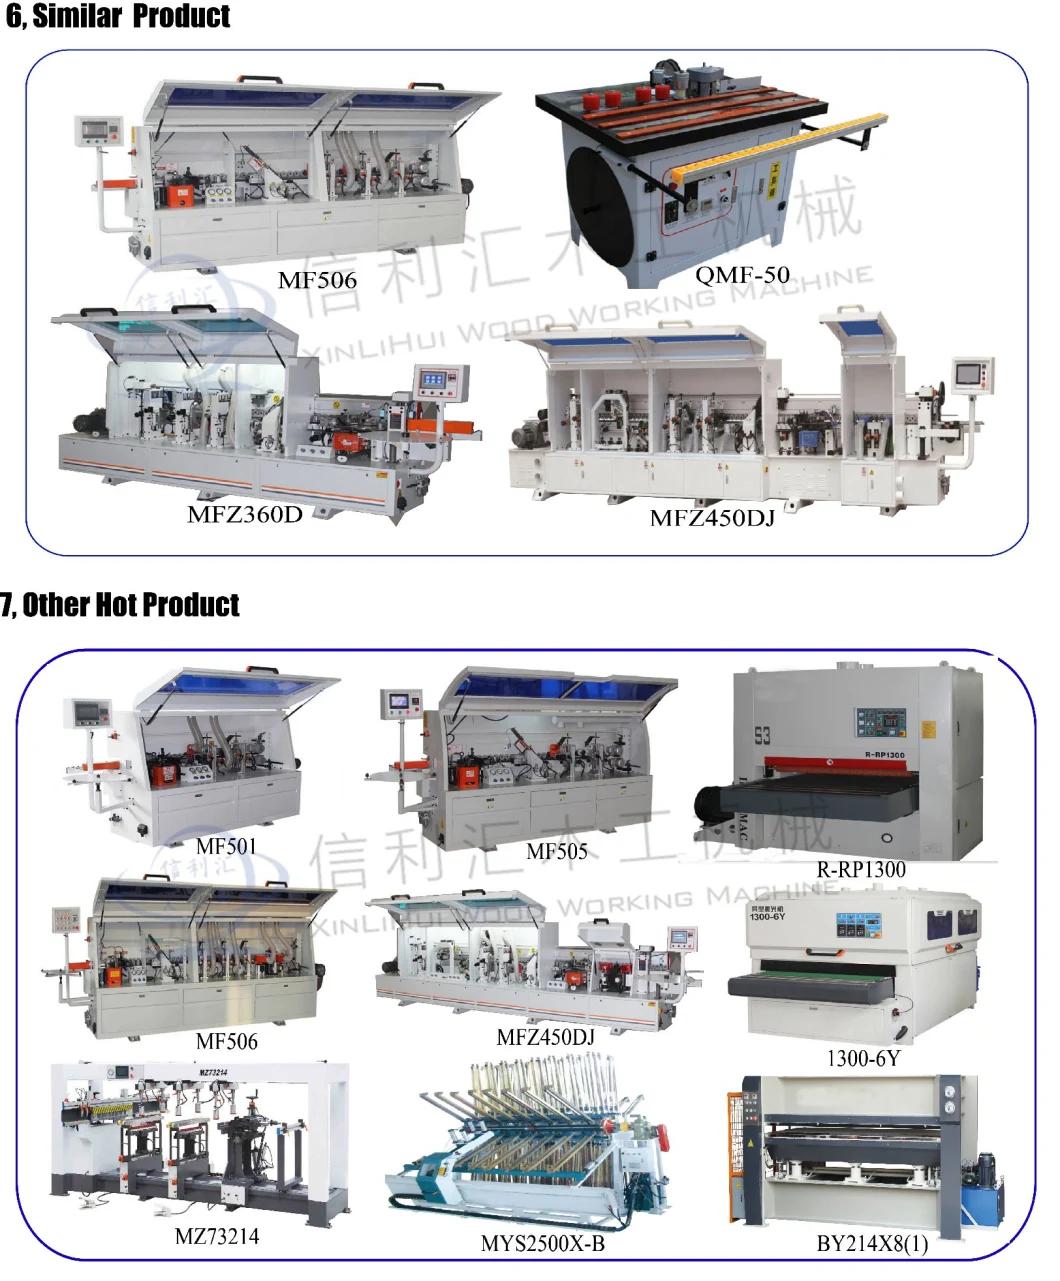 Semi-Automatic Woodworking Edge Banding Machine with PVC with Excellent Services Easy Hand Operation Edge Banding Machine/ Multi Function Edge Bonder Machine